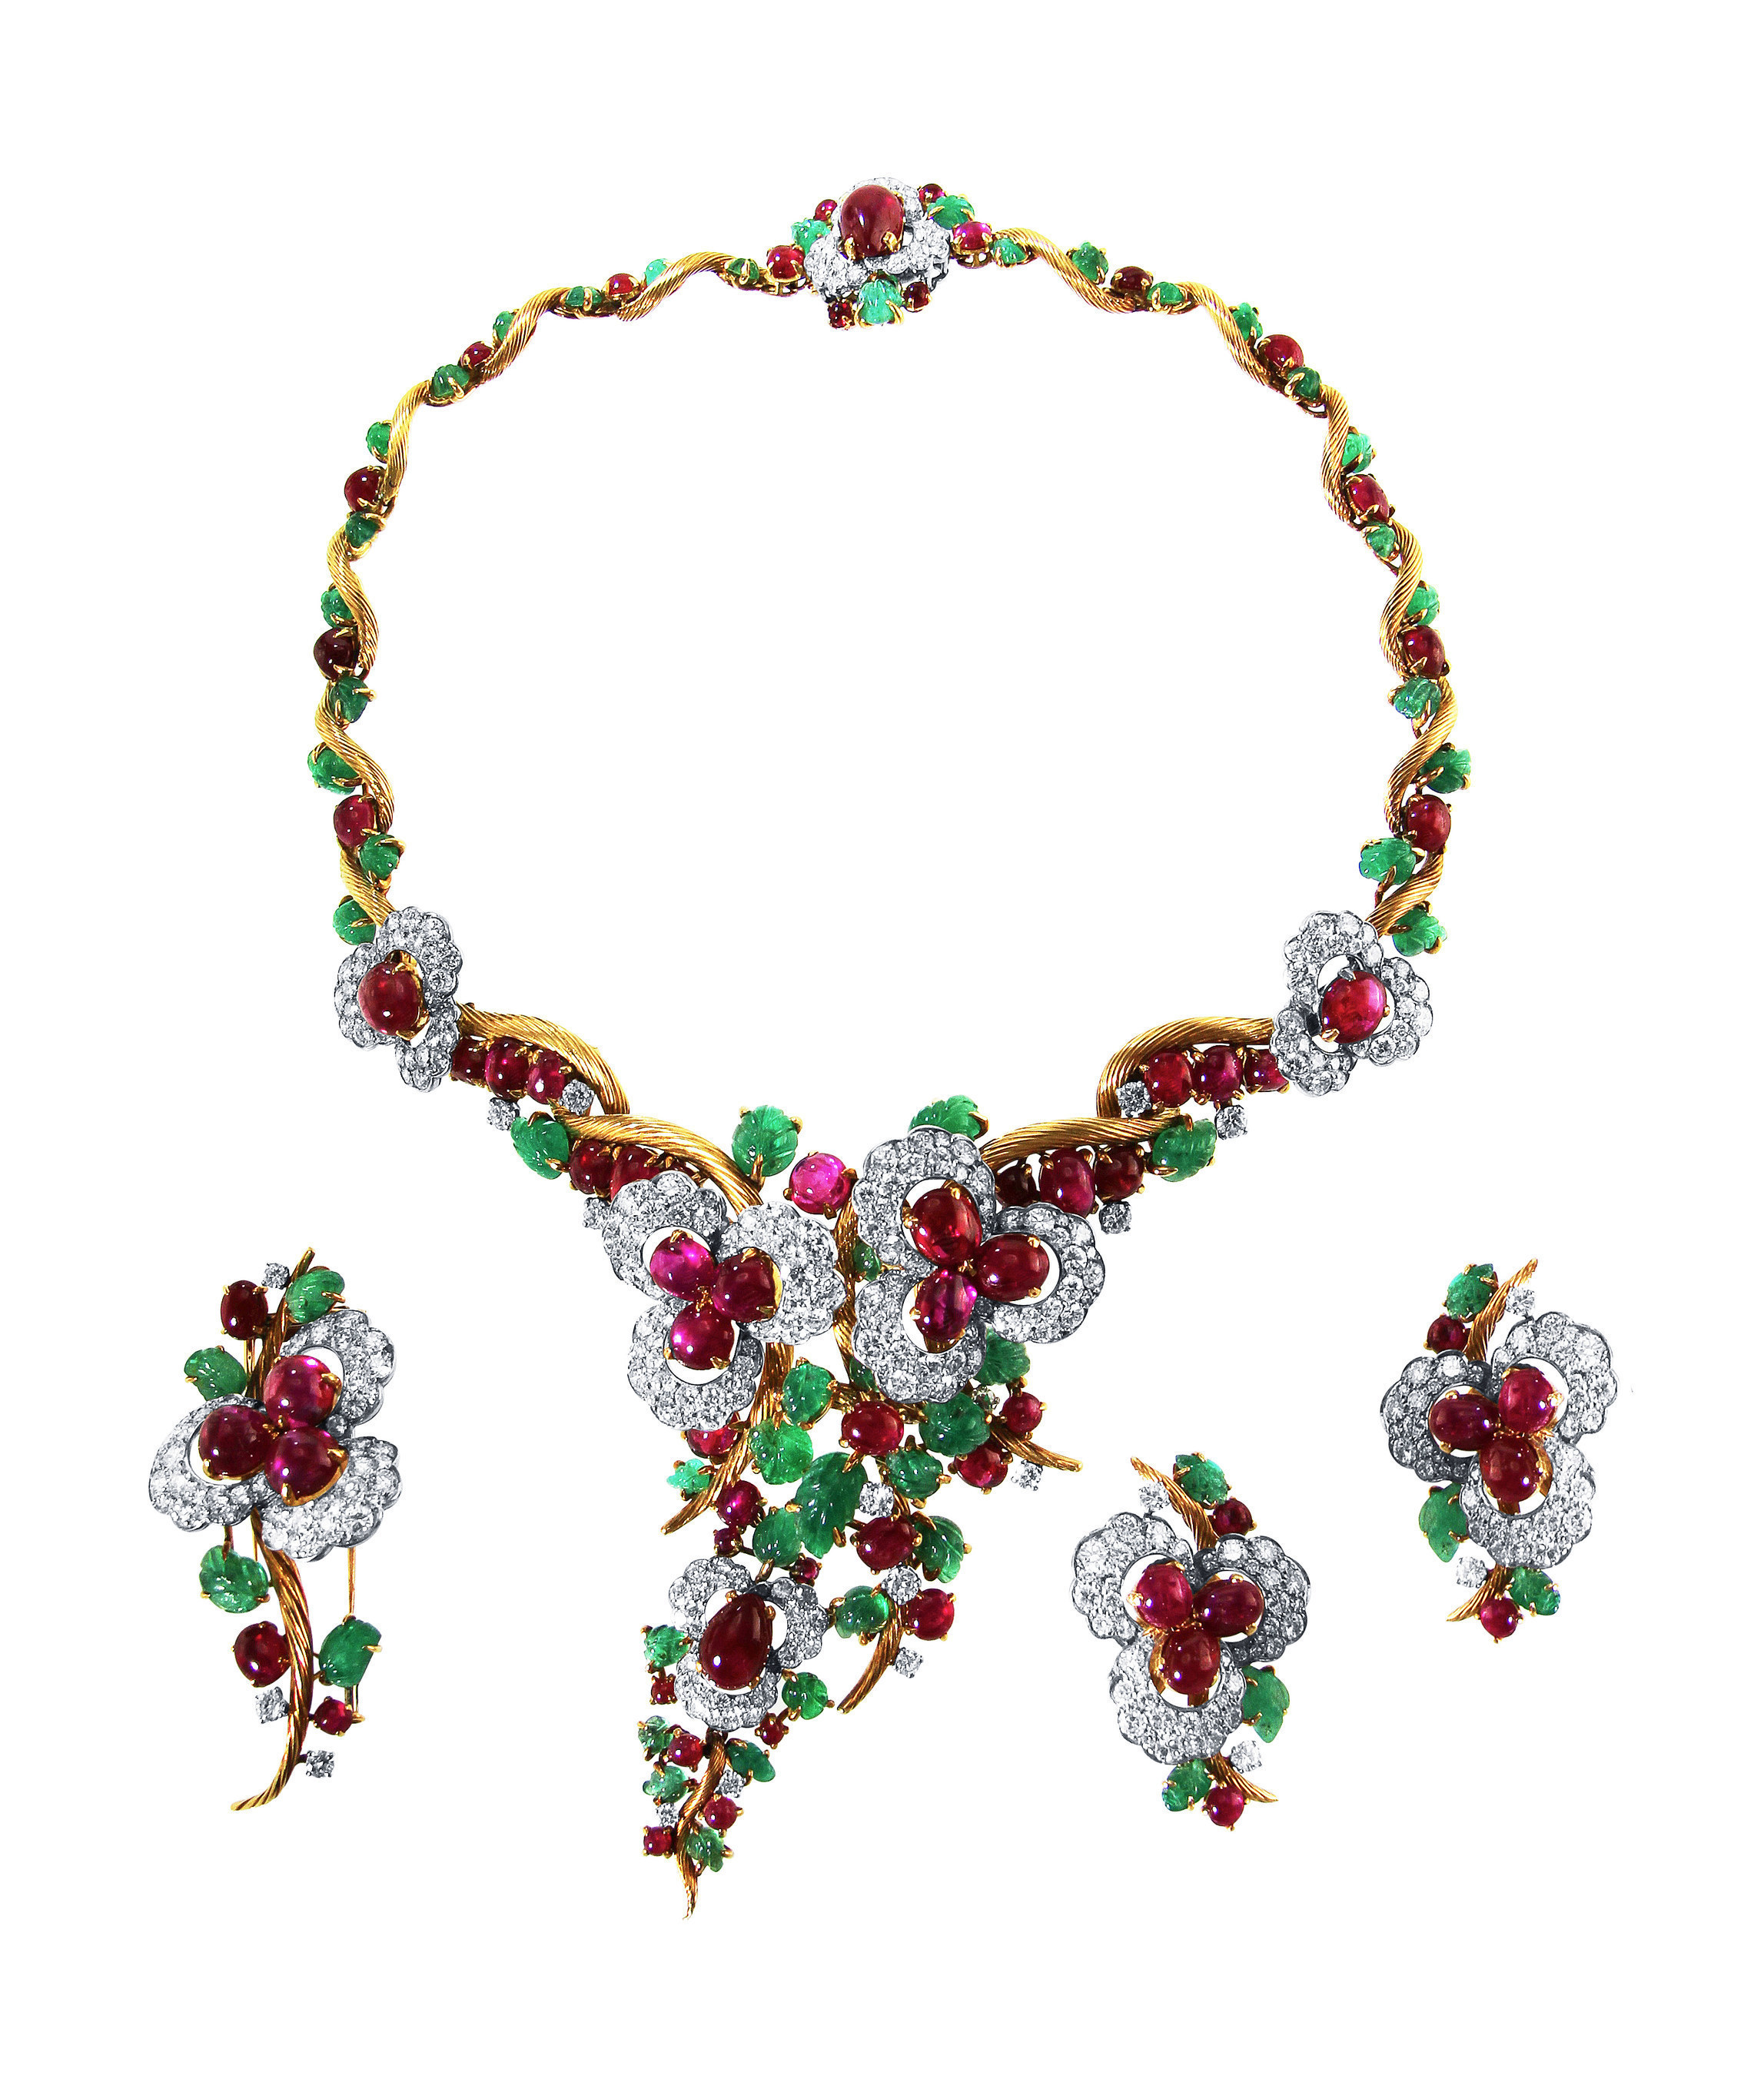 18 Karat Gold, Platinum, Emerald, Ruby and Diamond Suite by Mauboussin, 1962 to 1965; Jeweller: J. S. Fearnley (USA), Grand, Booth GP101 Estimated Price: SGD 406,000